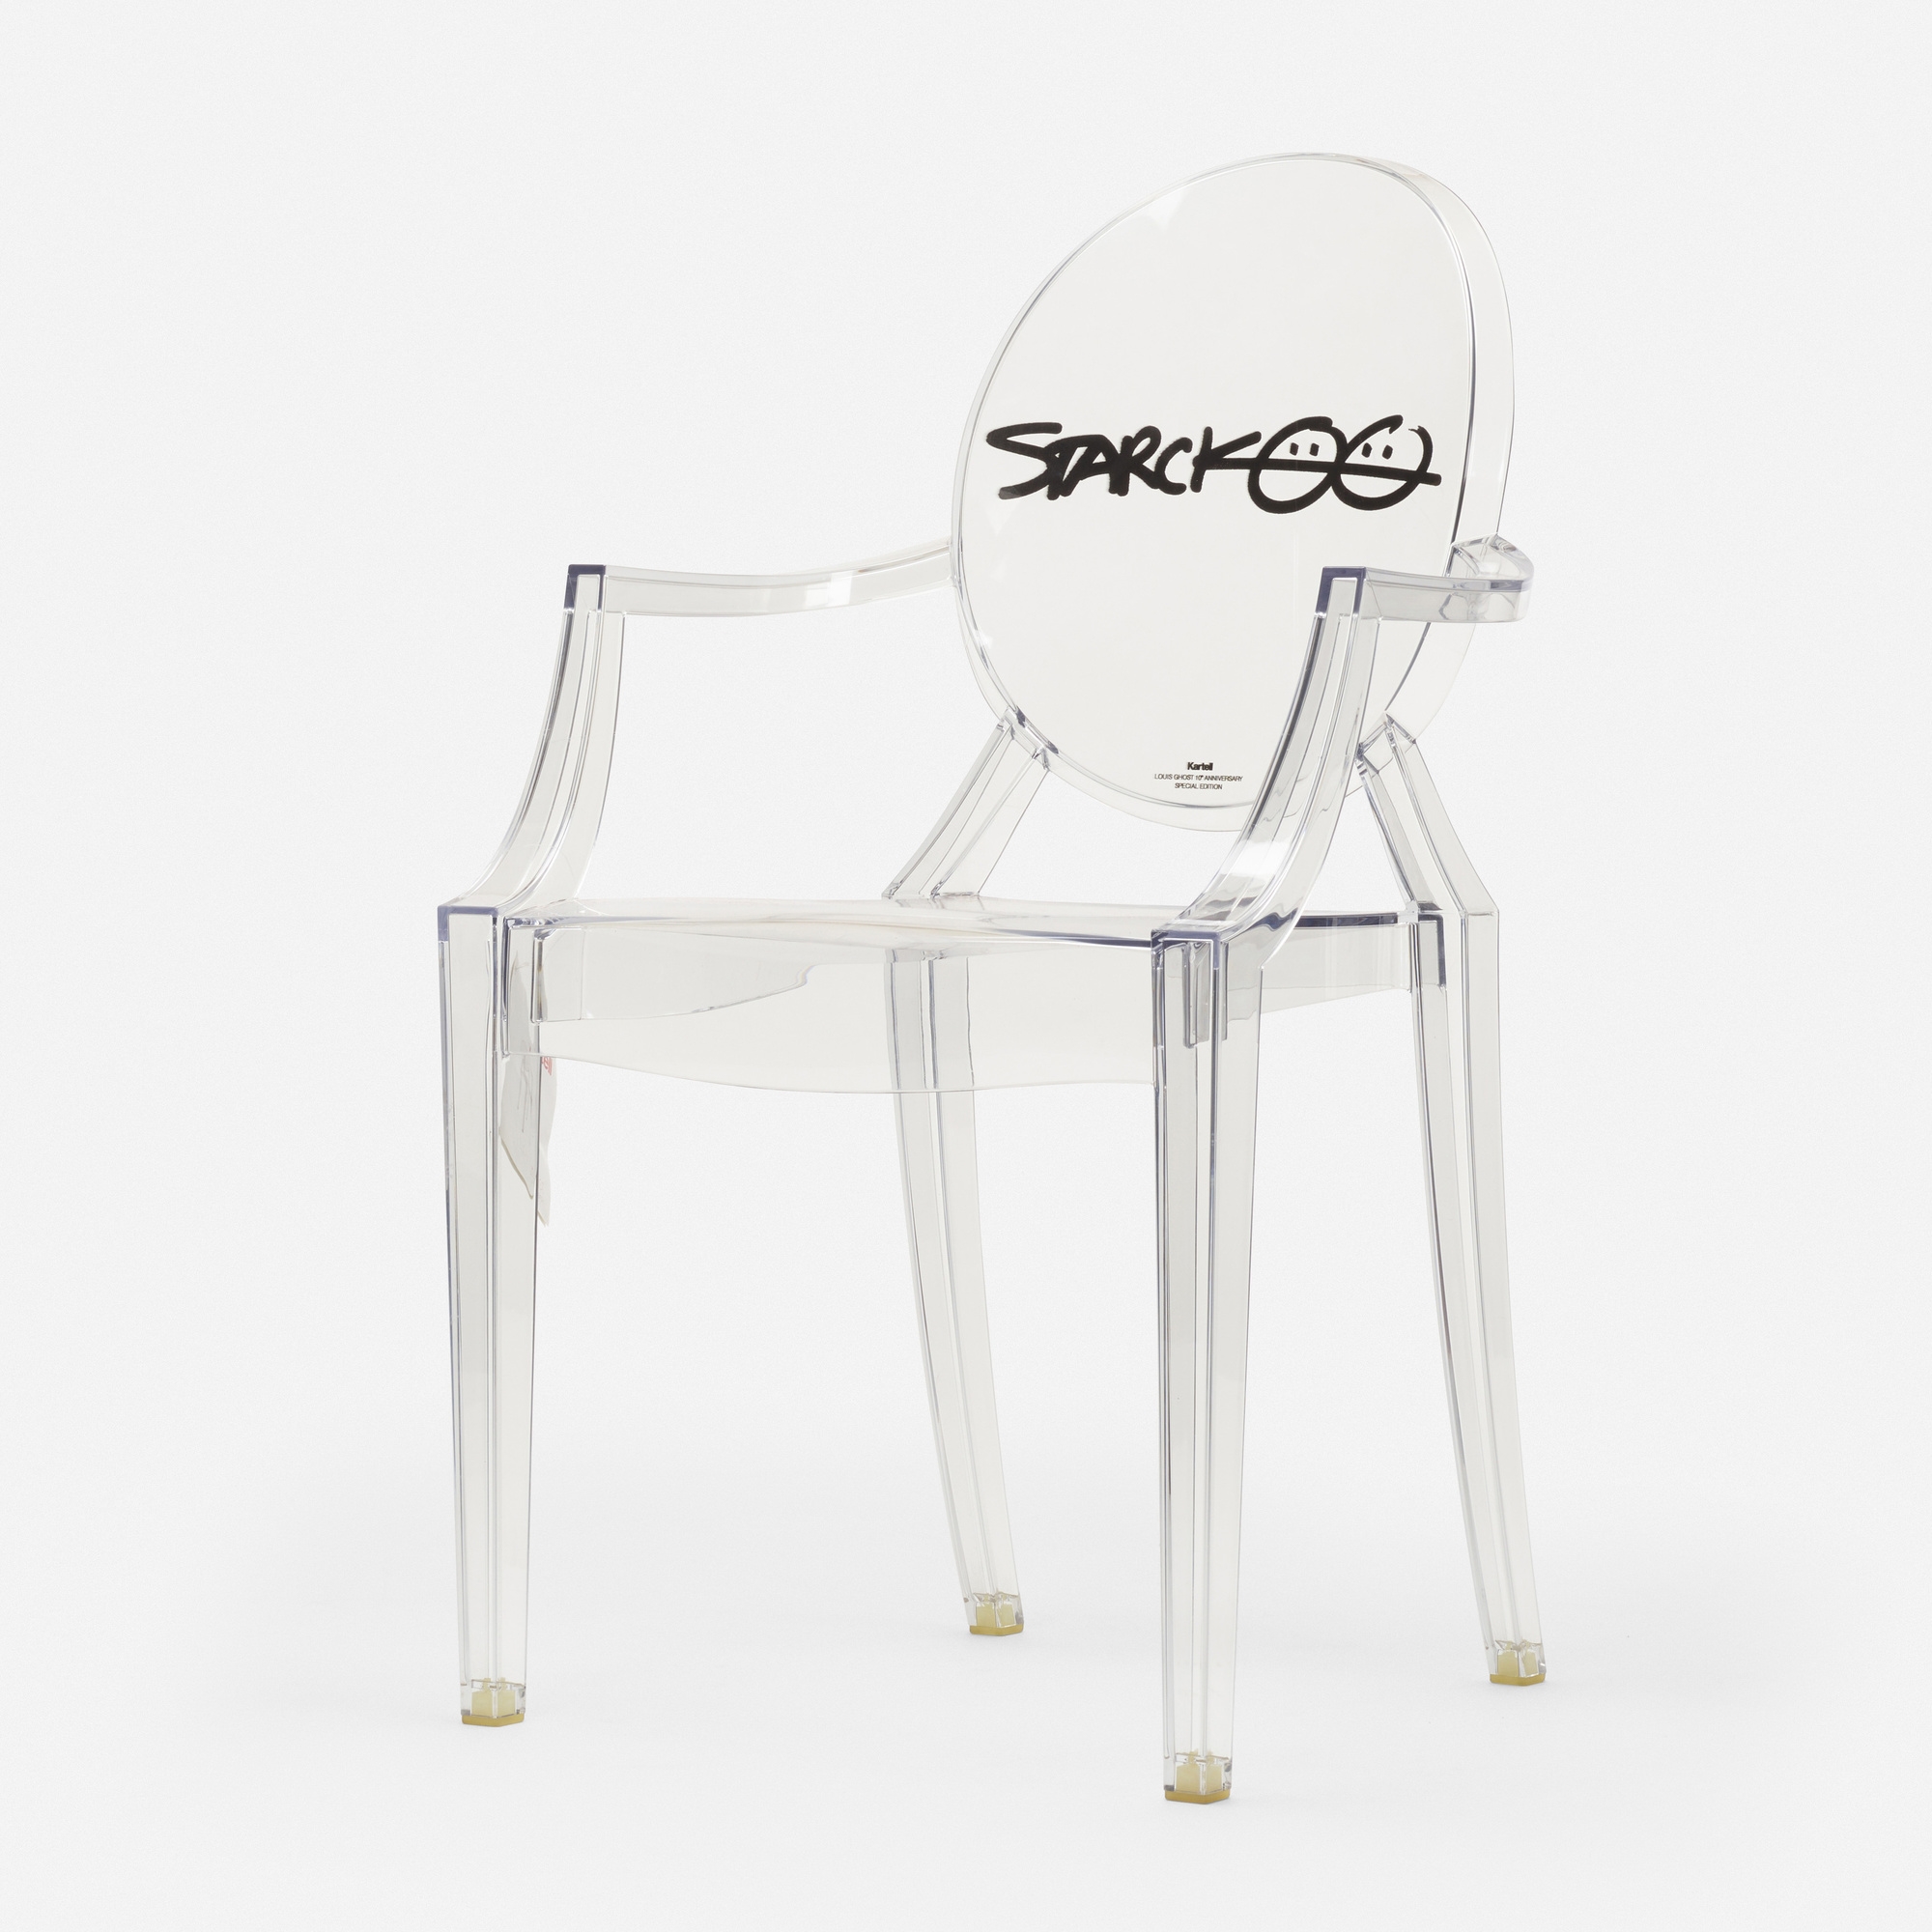 Artwork by Philippe Starck, Limited Edition Kartell Louis Ghost chair, Made of molded acrylic